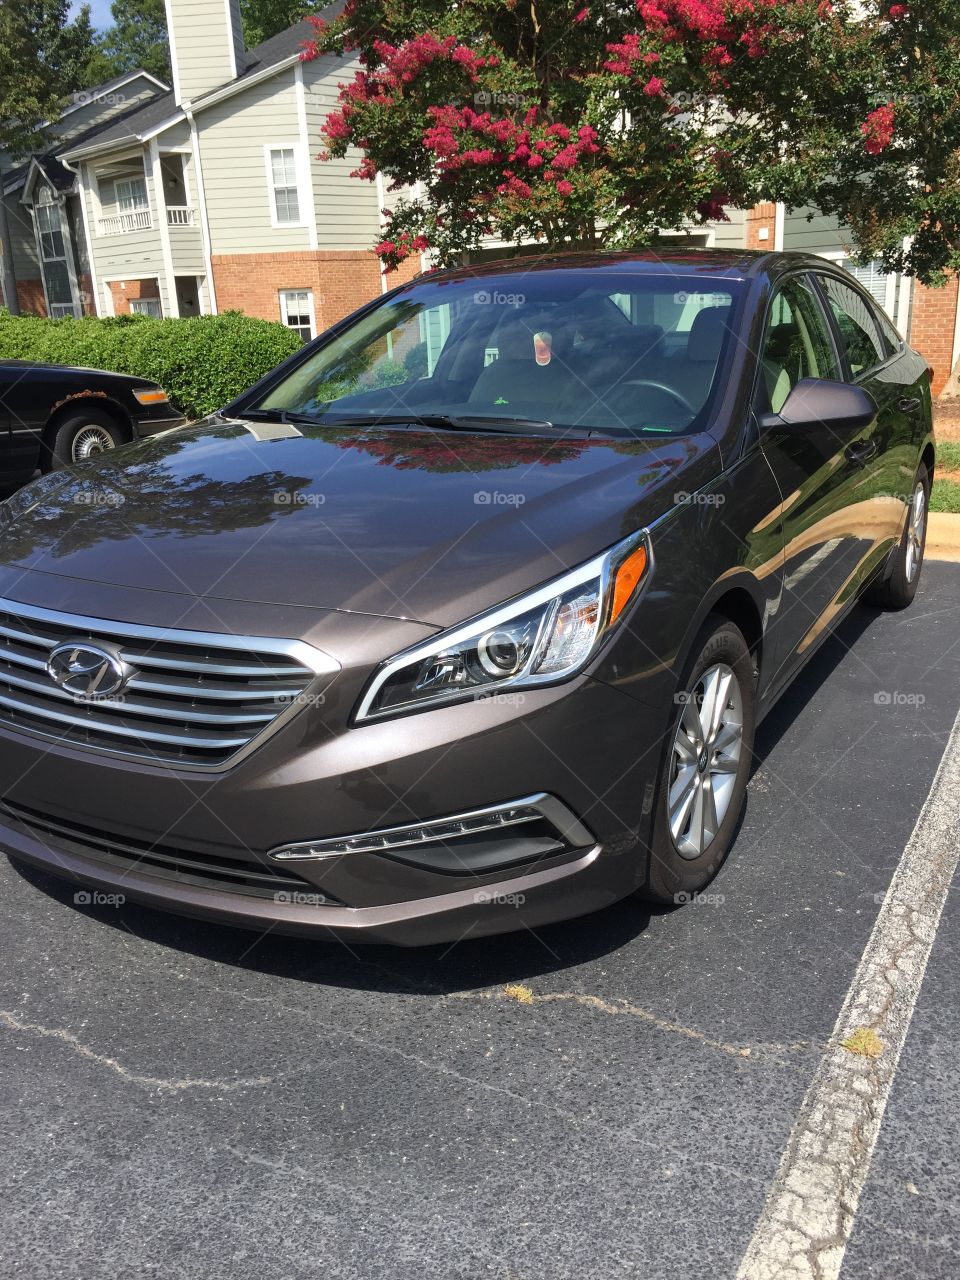 New car. A brand new car that I never thought I would ever have. 2015 Hyundai Sonata.